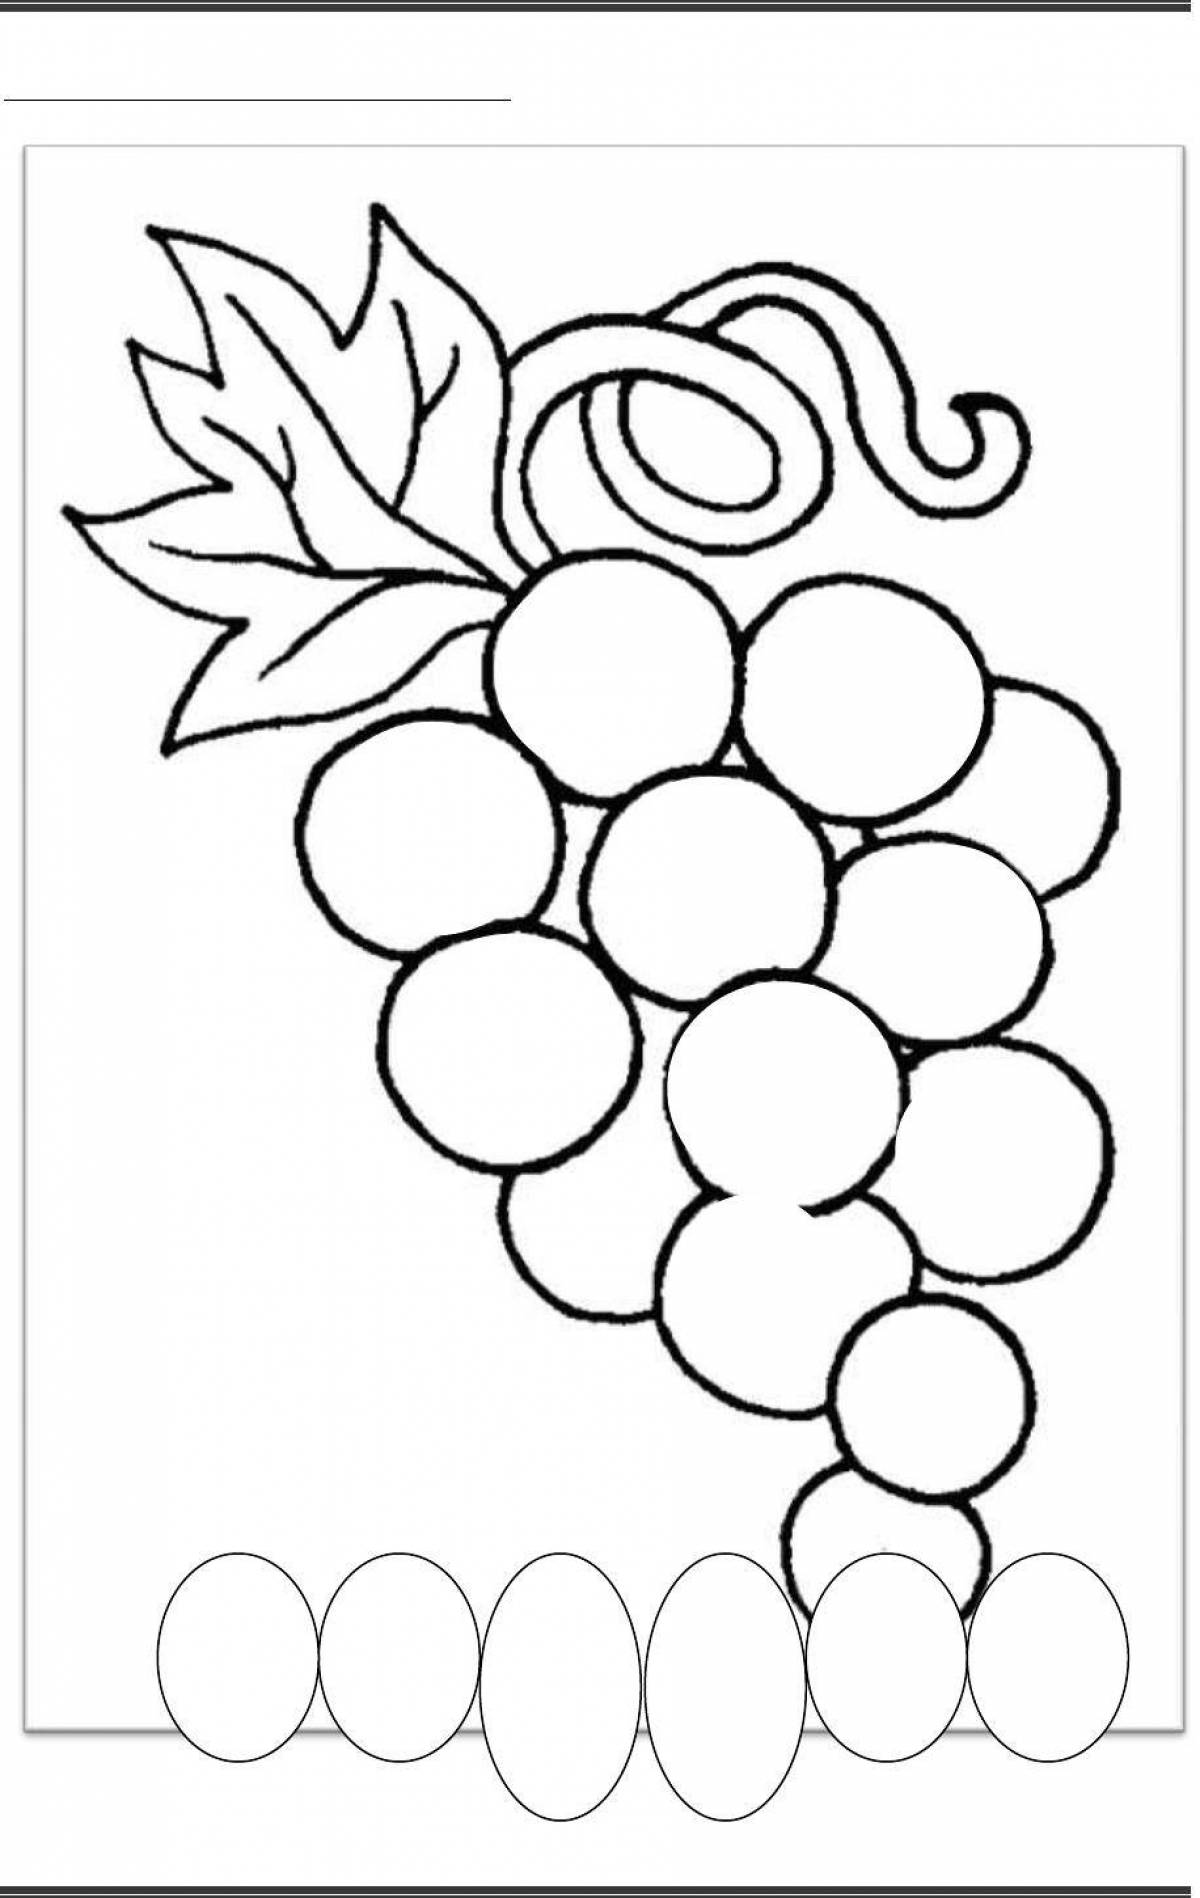 Outstanding pre-k grape coloring page